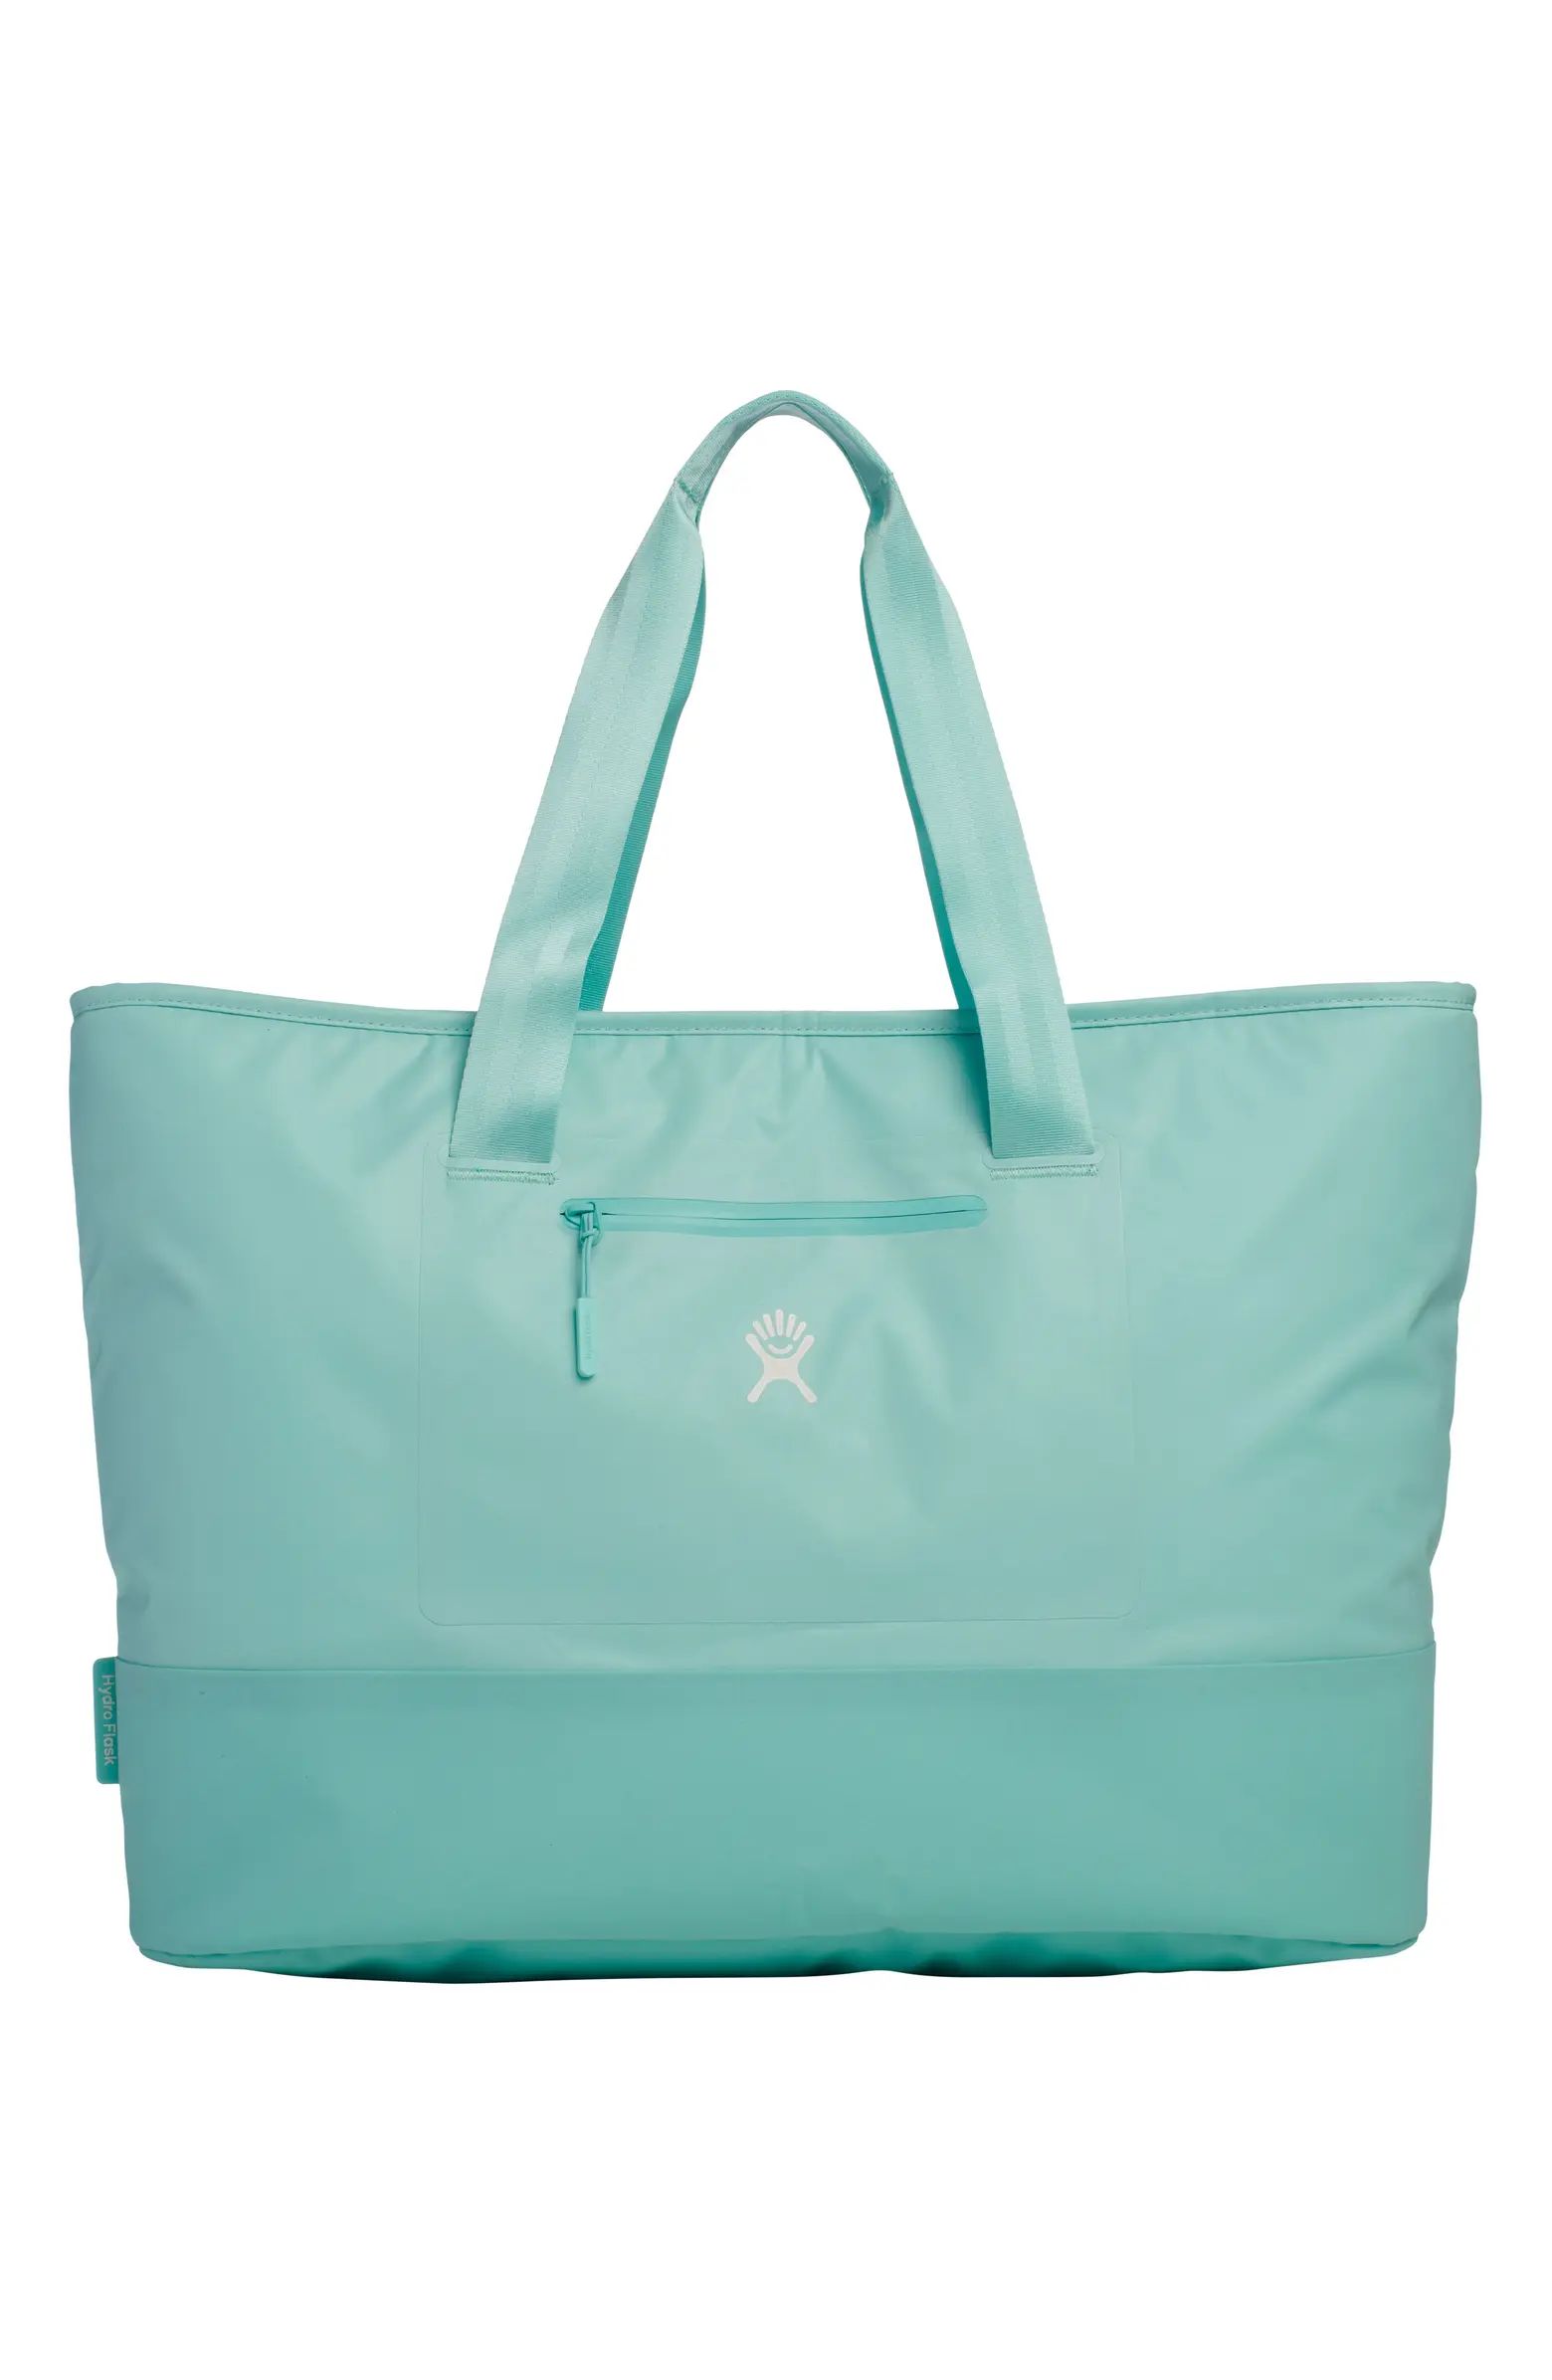 35-Liter Insulated Tote | Nordstrom Rack